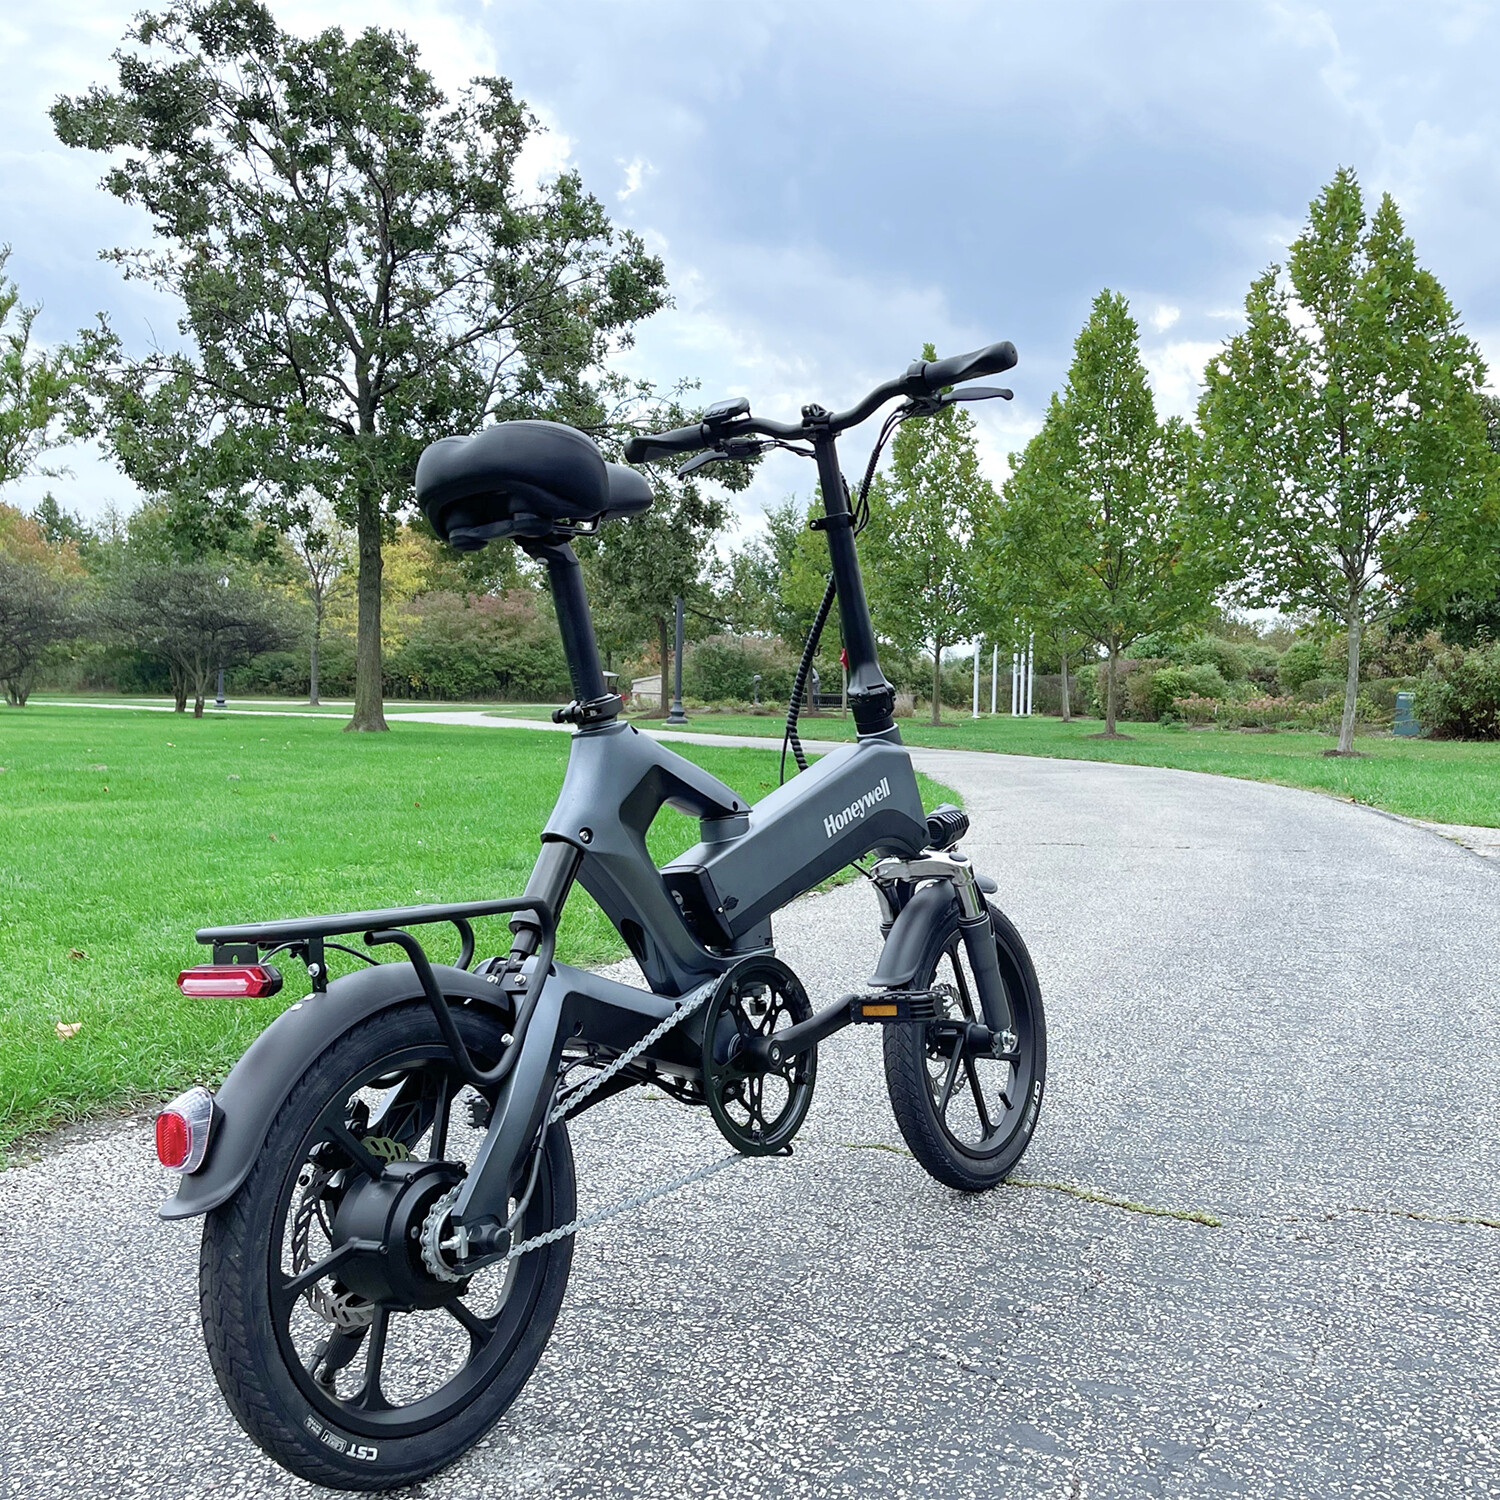 Dasher Foldable Bicycle (Silver) - Honeywell Dasher Foldable E-Bike - Touch of Modern